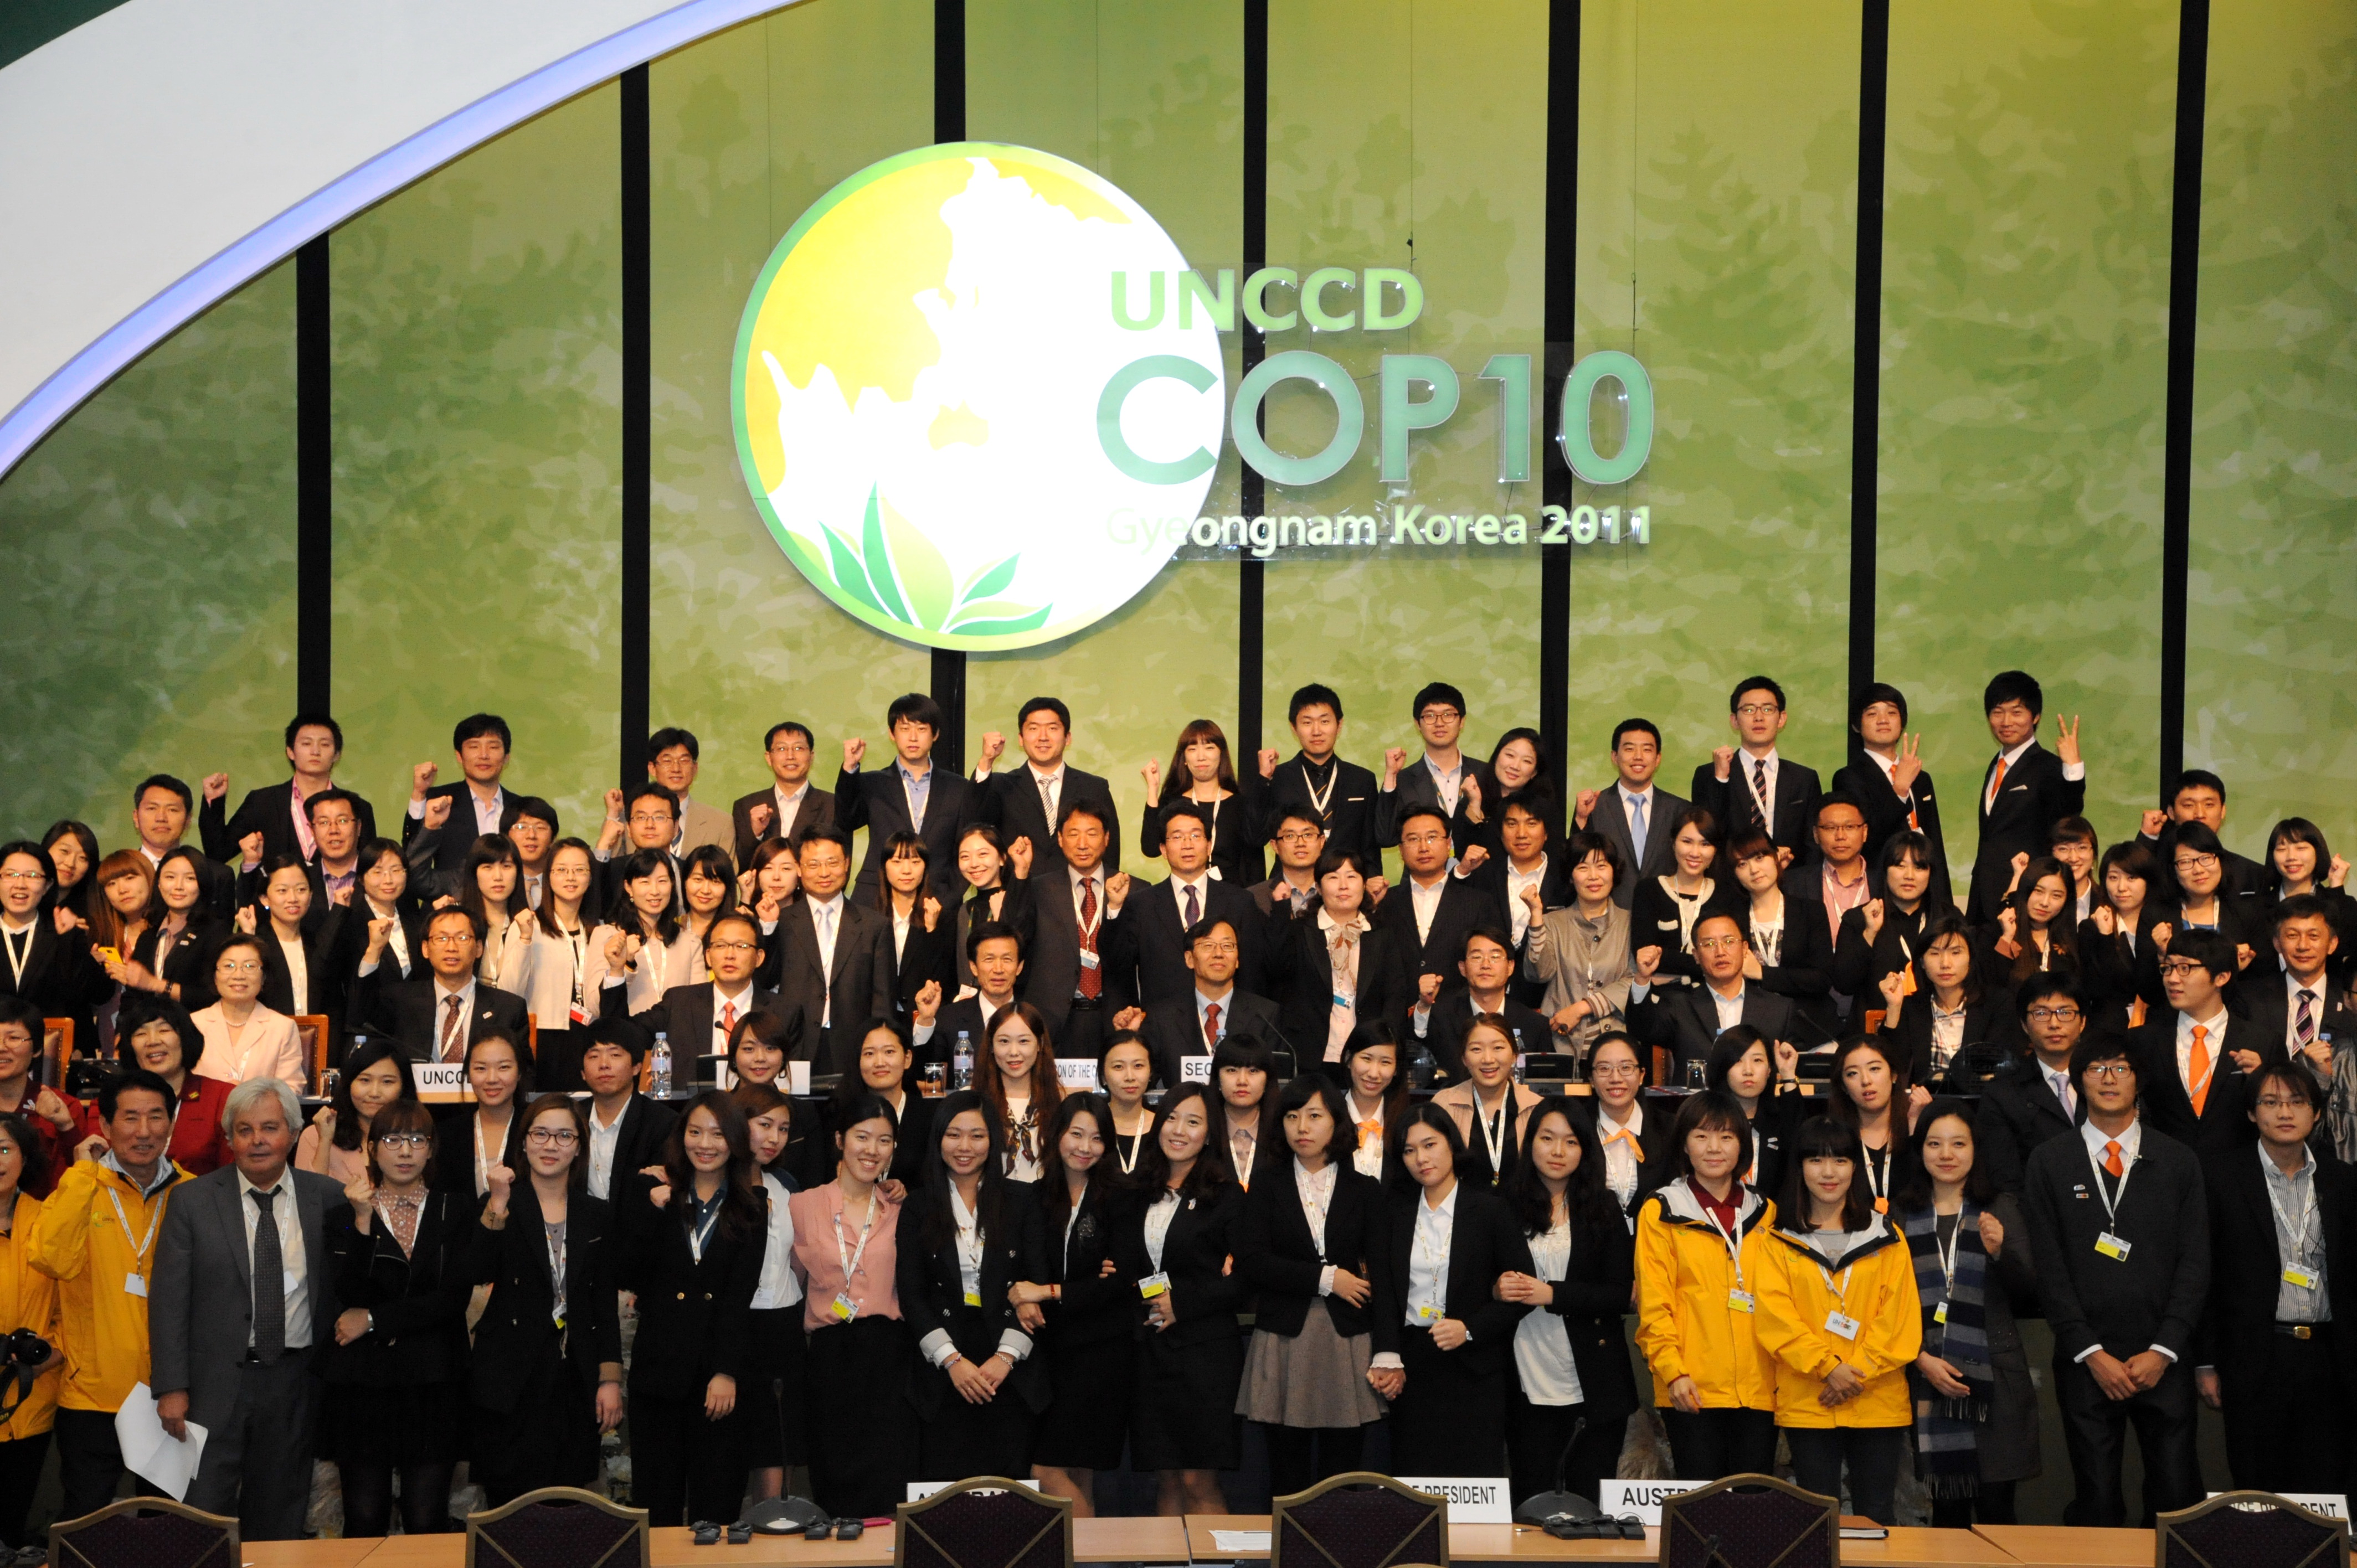 KFS successfully hosted the UNCCD COP10 이미지2